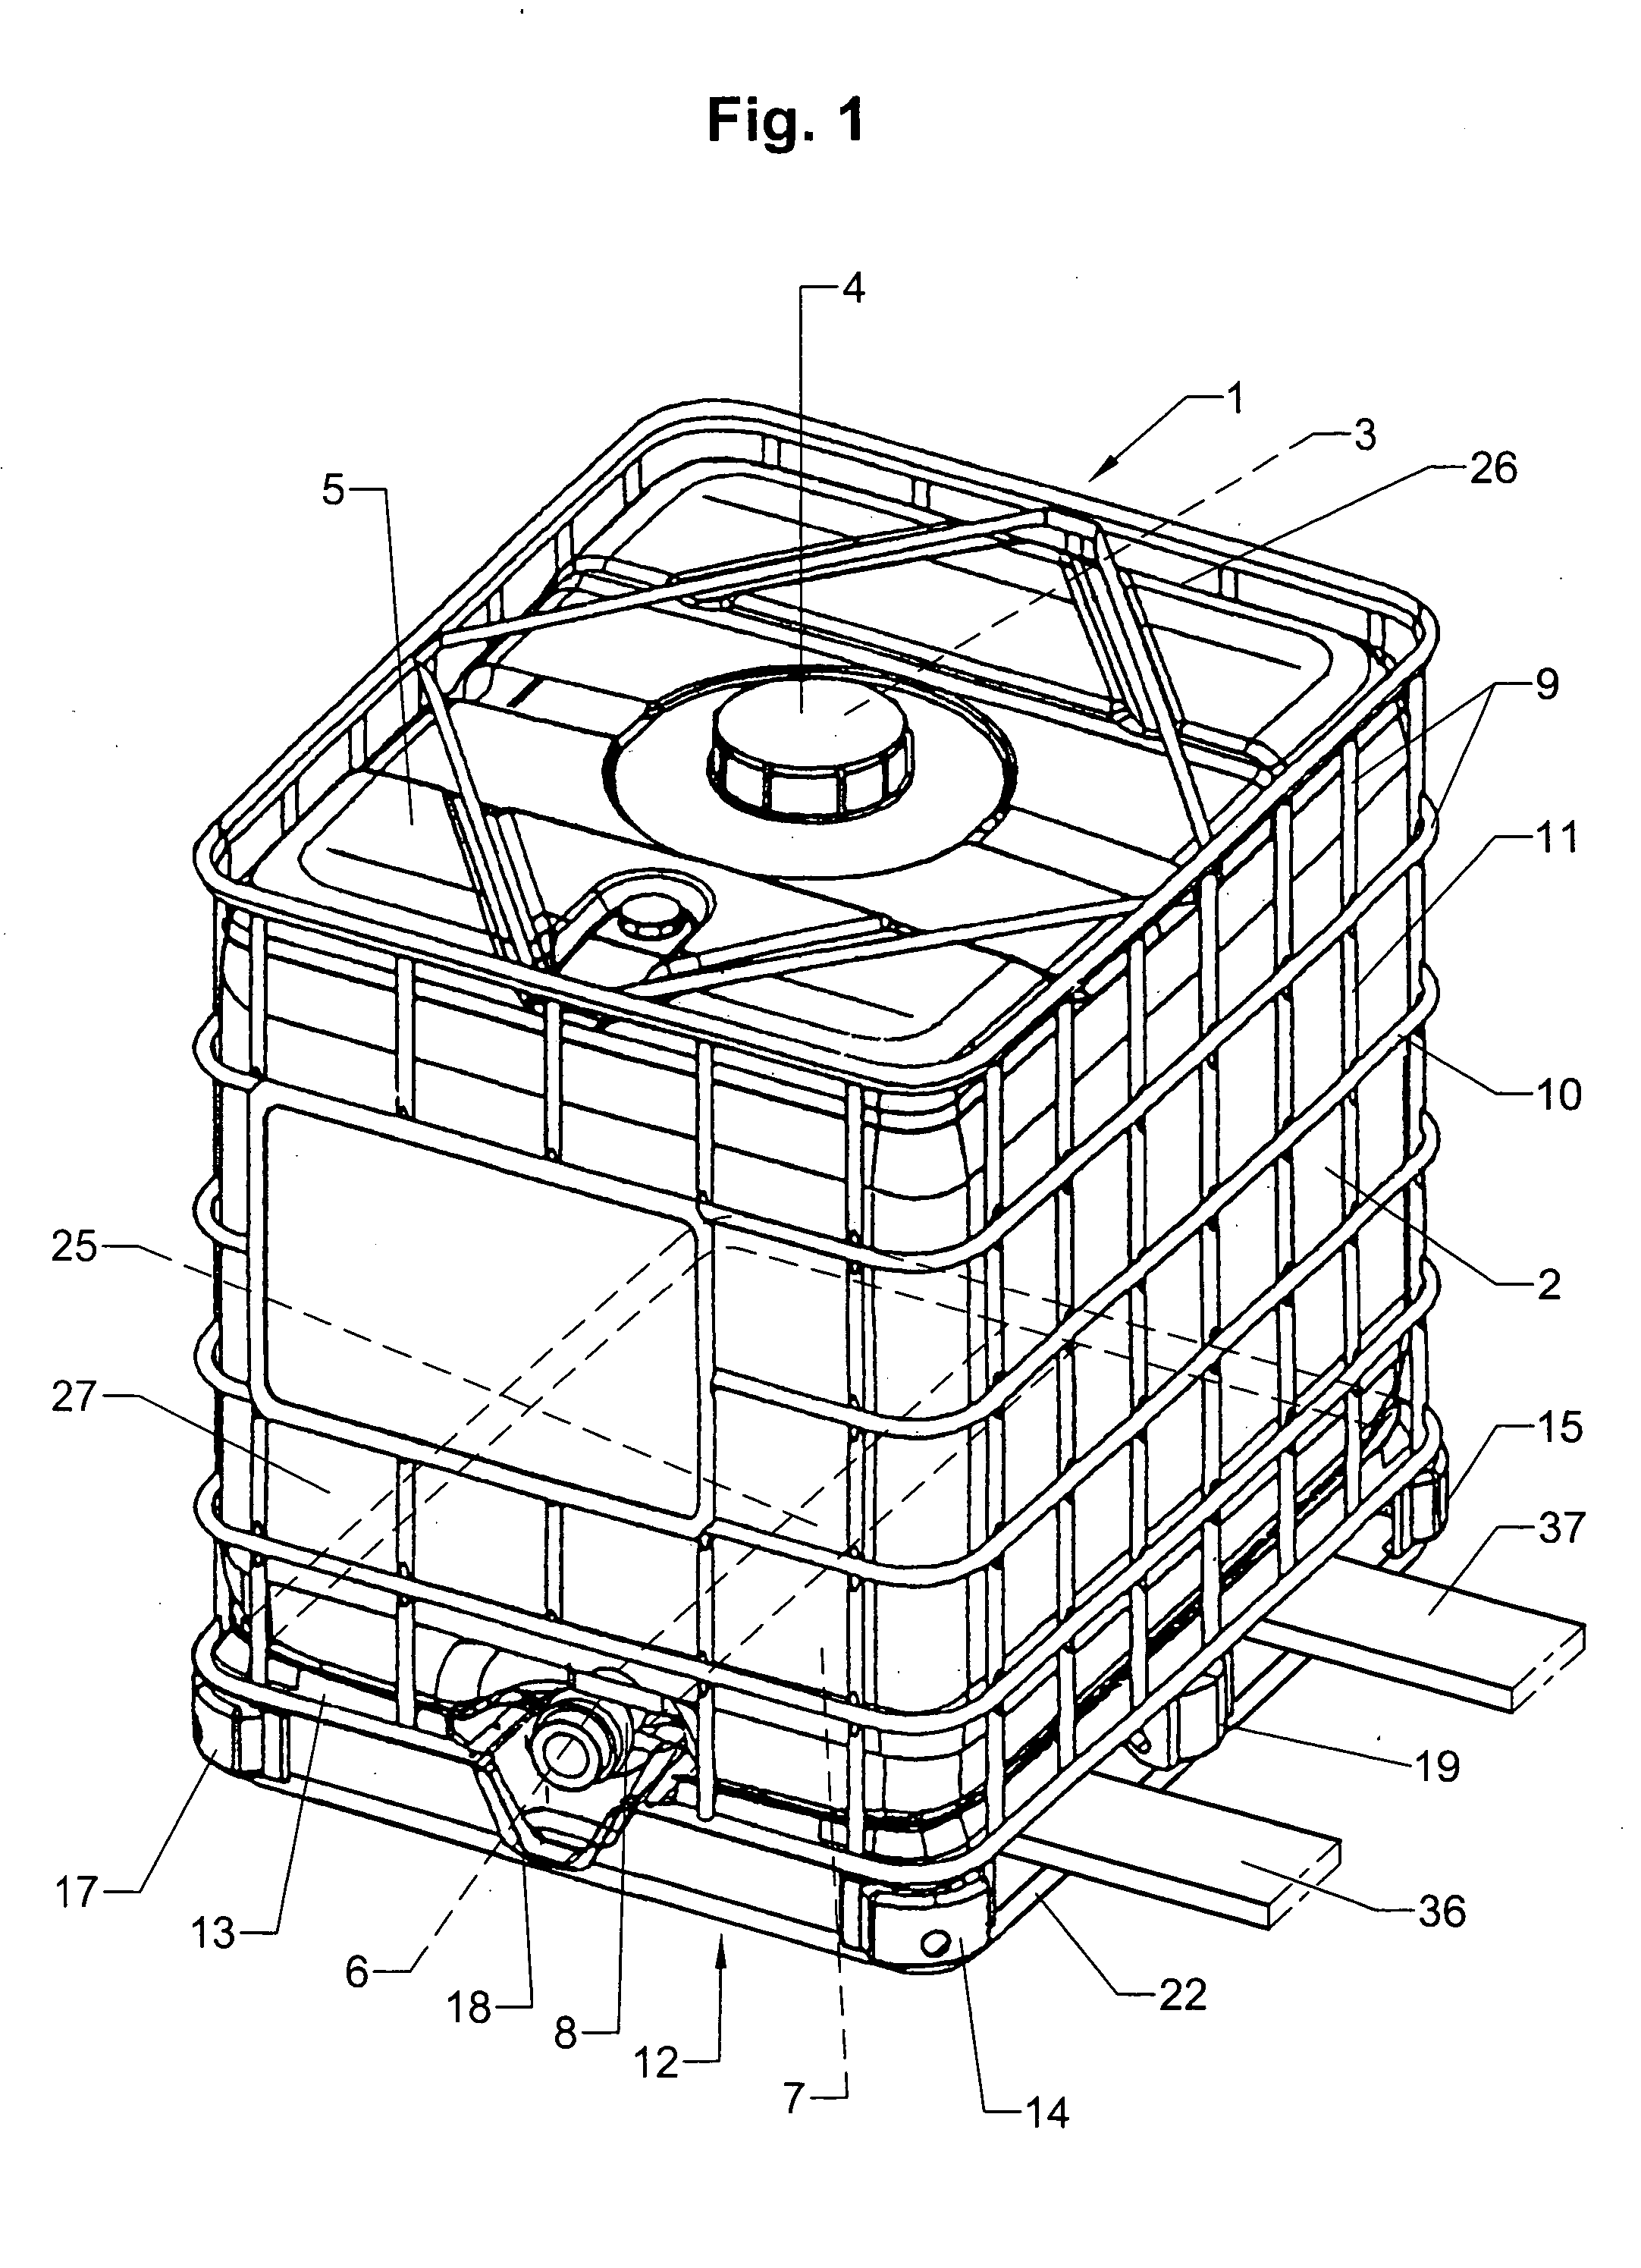 Pallet-type support frame for transport and storage containers for liquids